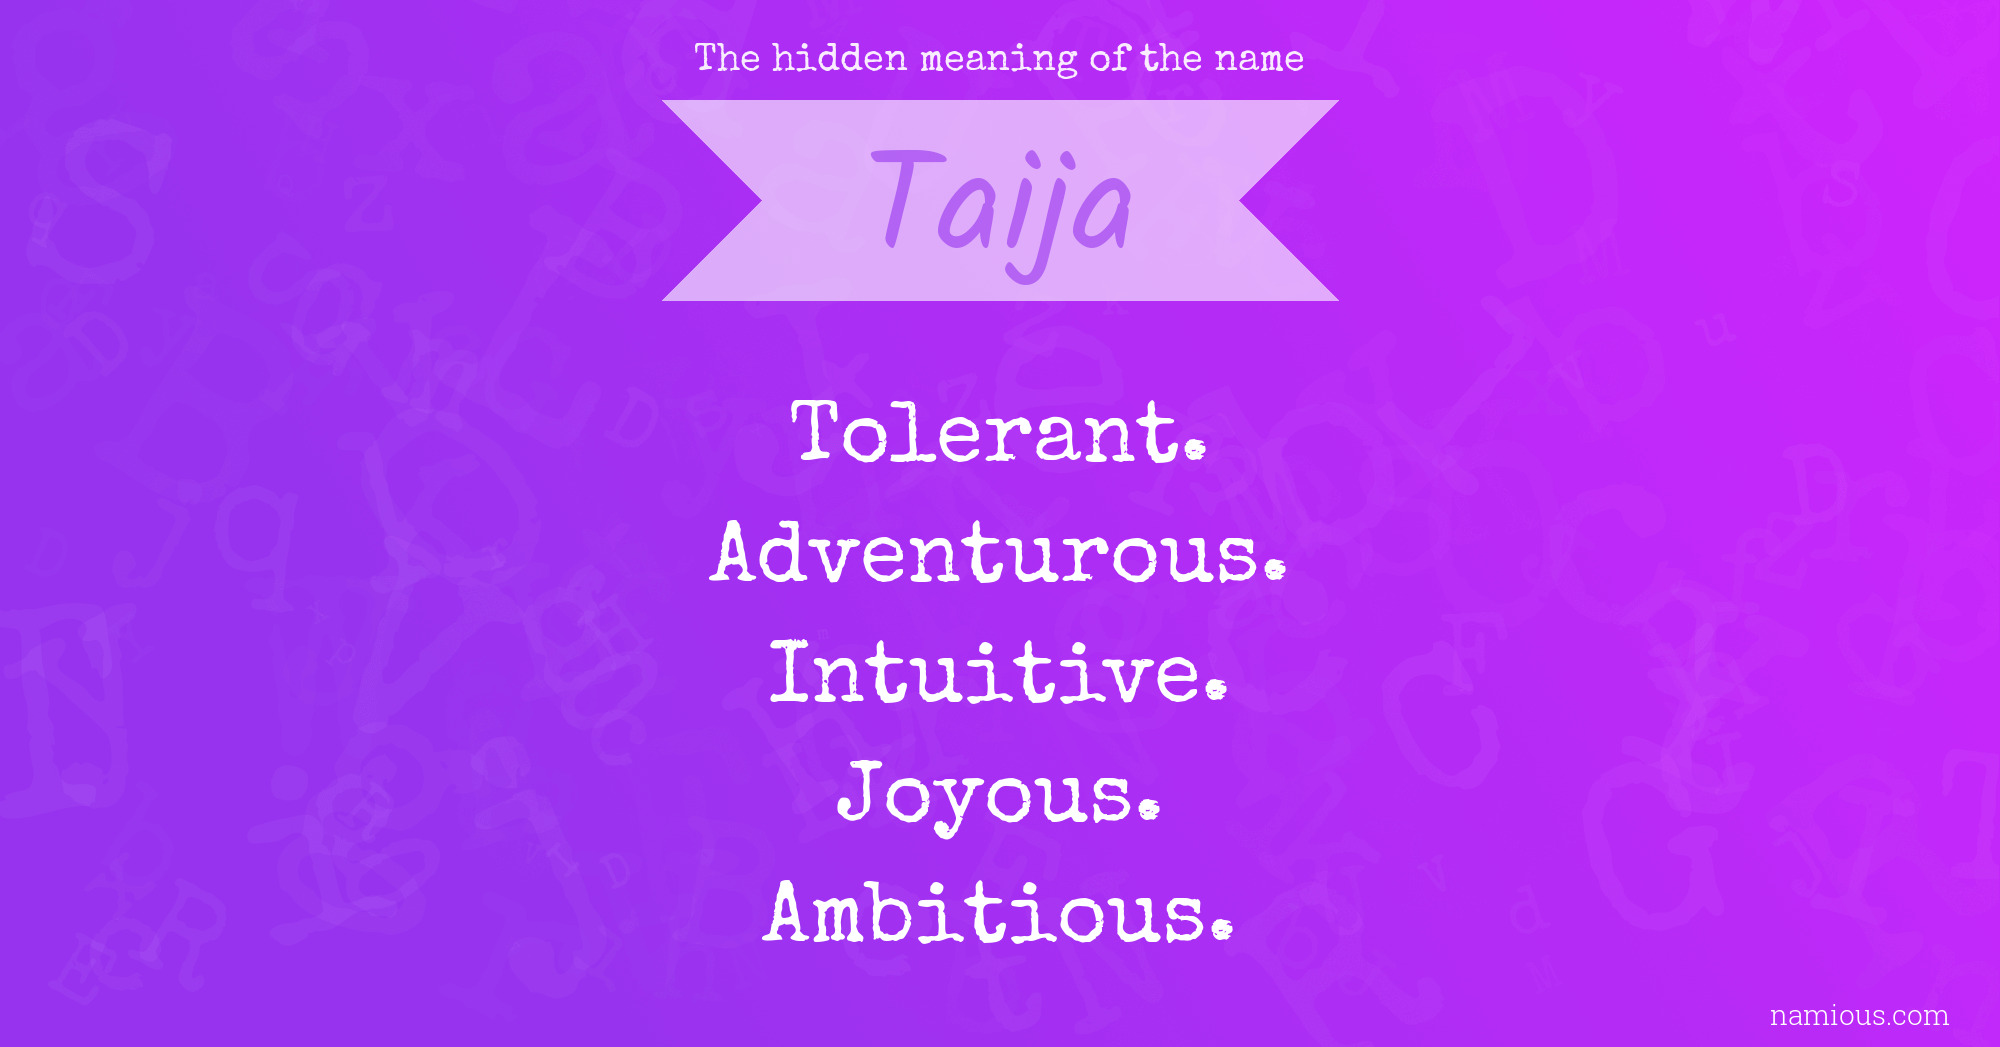 The hidden meaning of the name Taija